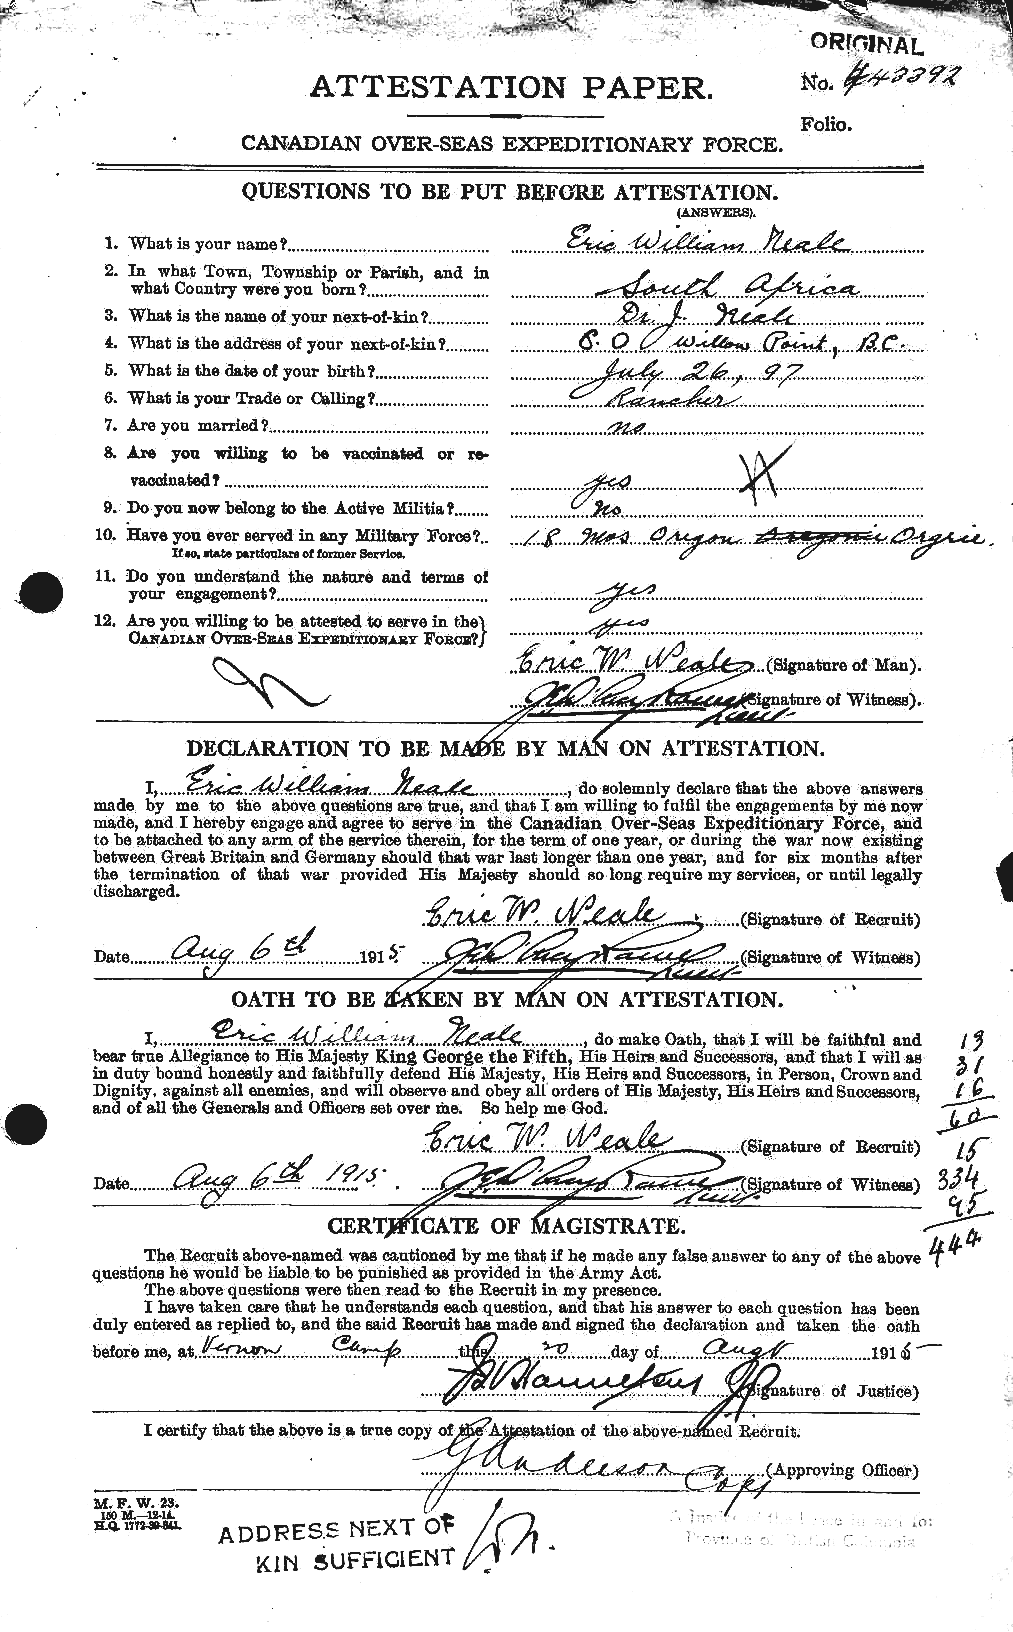 Personnel Records of the First World War - CEF 543568a